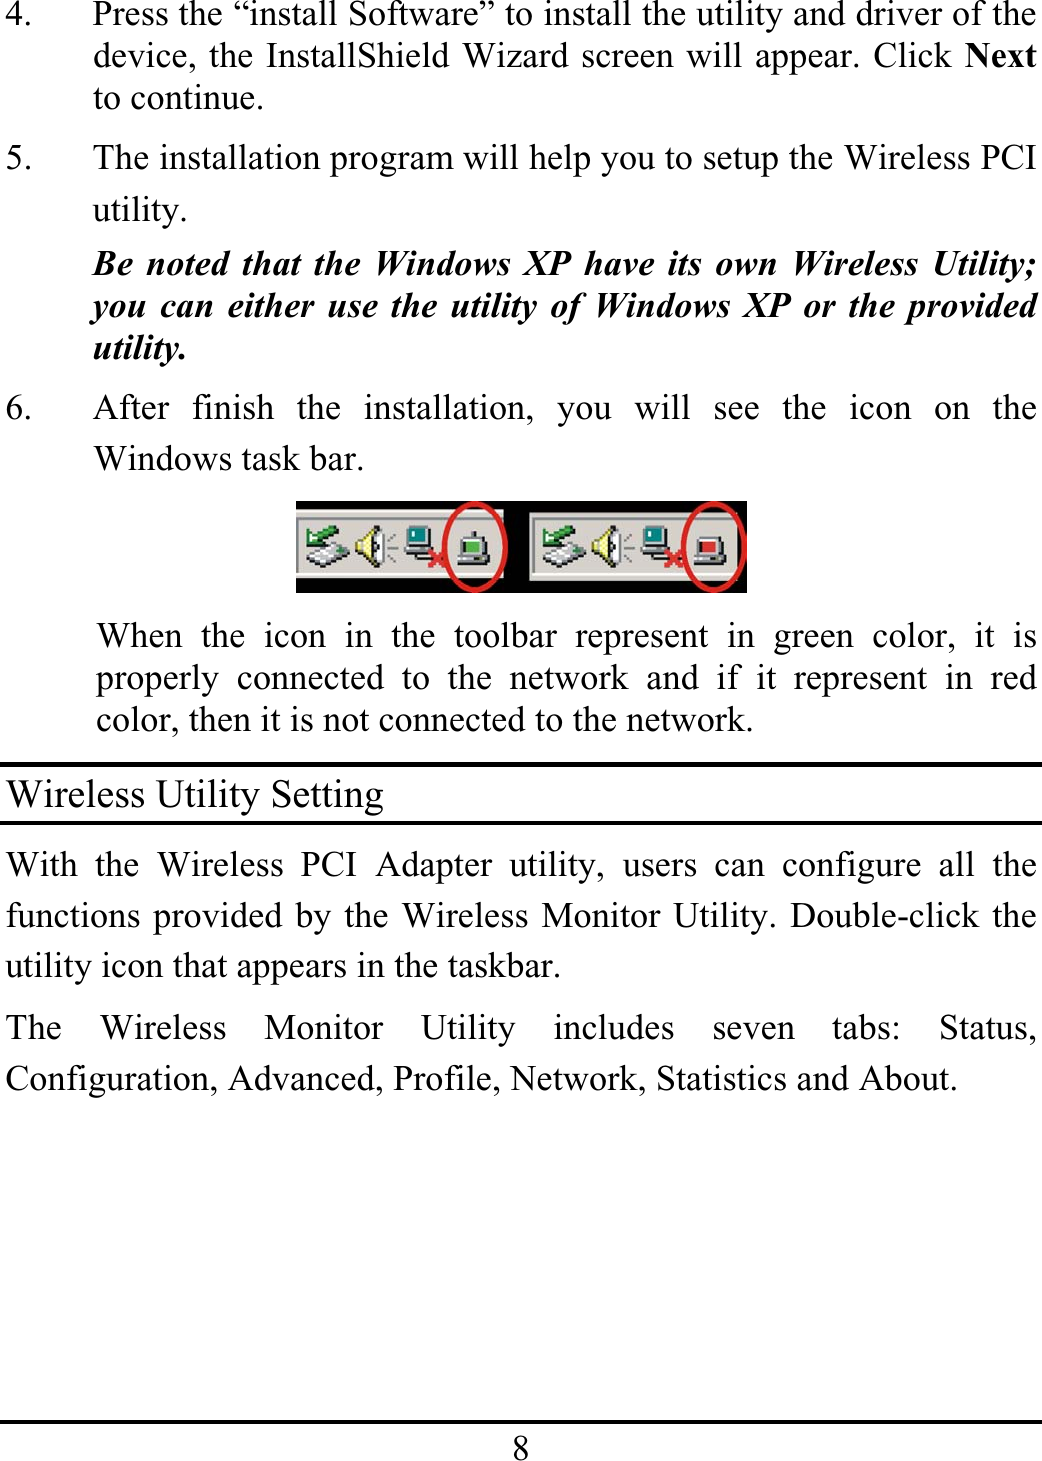 84. Press the “install Software” to install the utility and driver of the device, the InstallShield Wizard screen will appear. Click Nextto continue.5. The installation program will help you to setup the Wireless PCIutility.Be noted that the Windows XP have its own Wireless Utility;you can either use the utility of Windows XP or the providedutility.6. After finish the installation, you will see the icon on theWindows task bar.When the icon in the toolbar represent in green color, it isproperly connected to the network and if it represent in redcolor, then it is not connected to the network.Wireless Utility SettingWith the Wireless PCI Adapter utility, users can configure all thefunctions provided by the Wireless Monitor Utility. Double-click theutility icon that appears in the taskbar.The Wireless Monitor Utility includes seven tabs: Status,Configuration, Advanced, Profile, Network, Statistics and About.